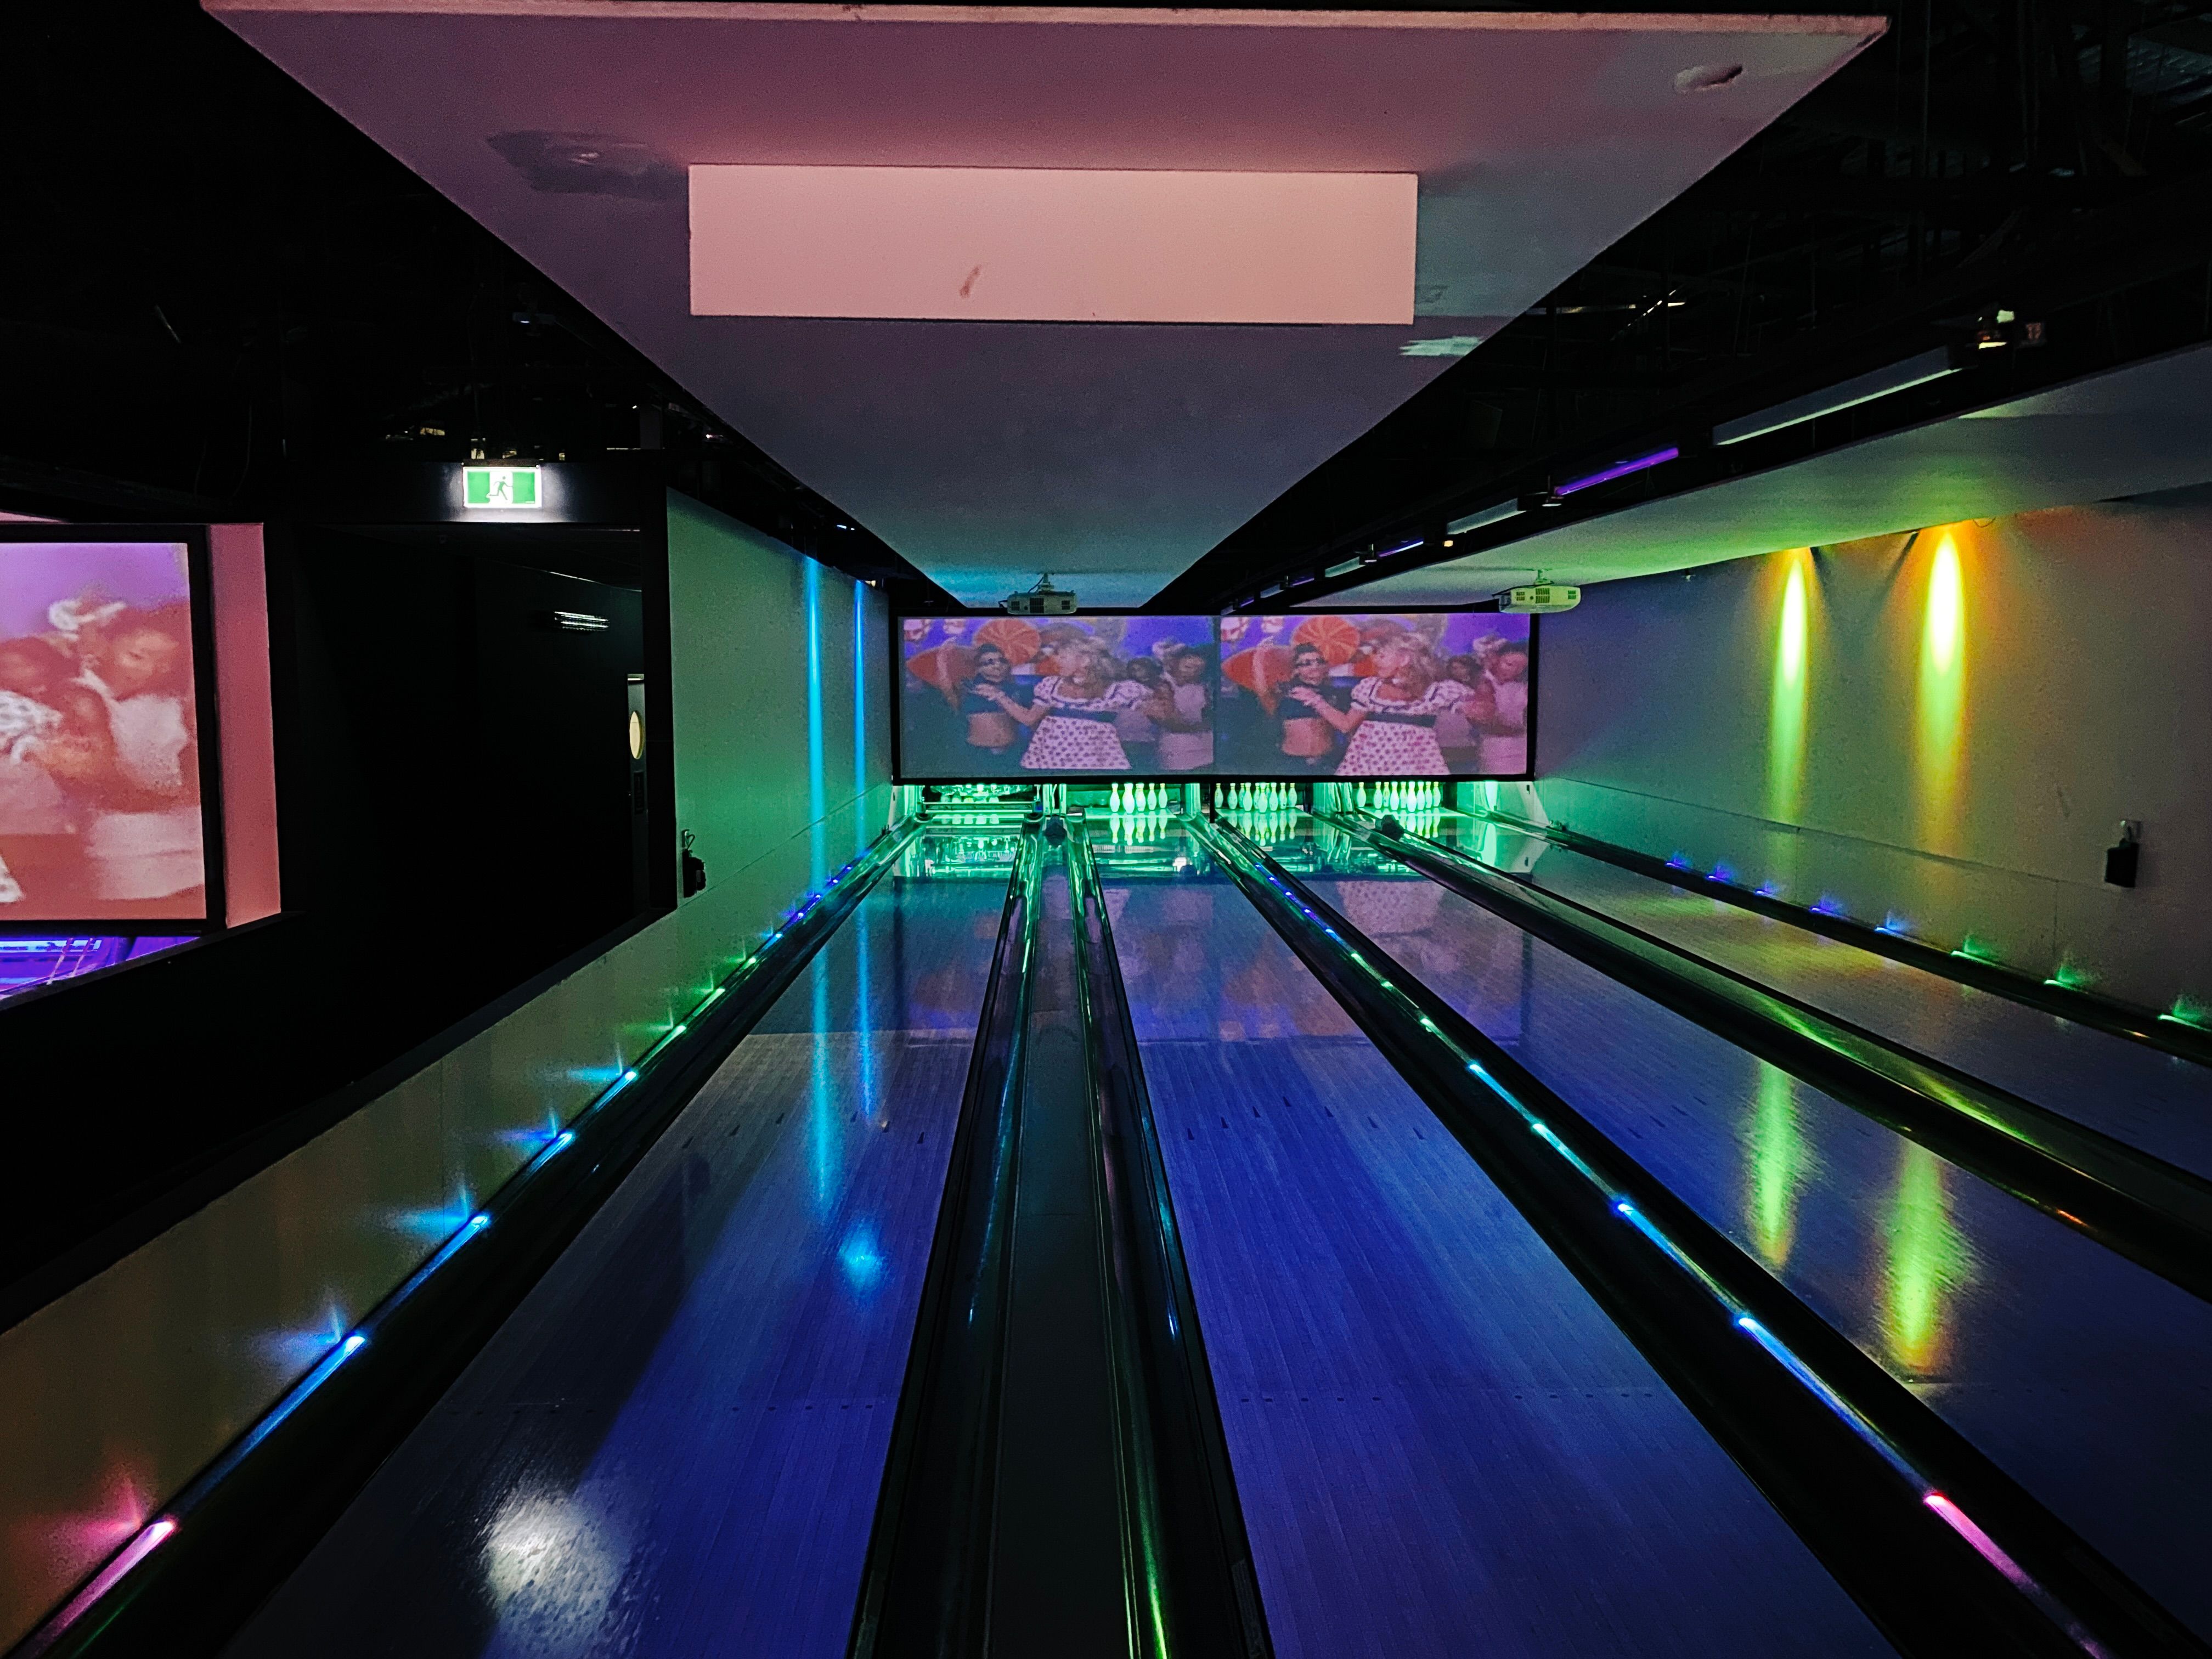 A photo looking down the middle of two lanes of a bowling alley.